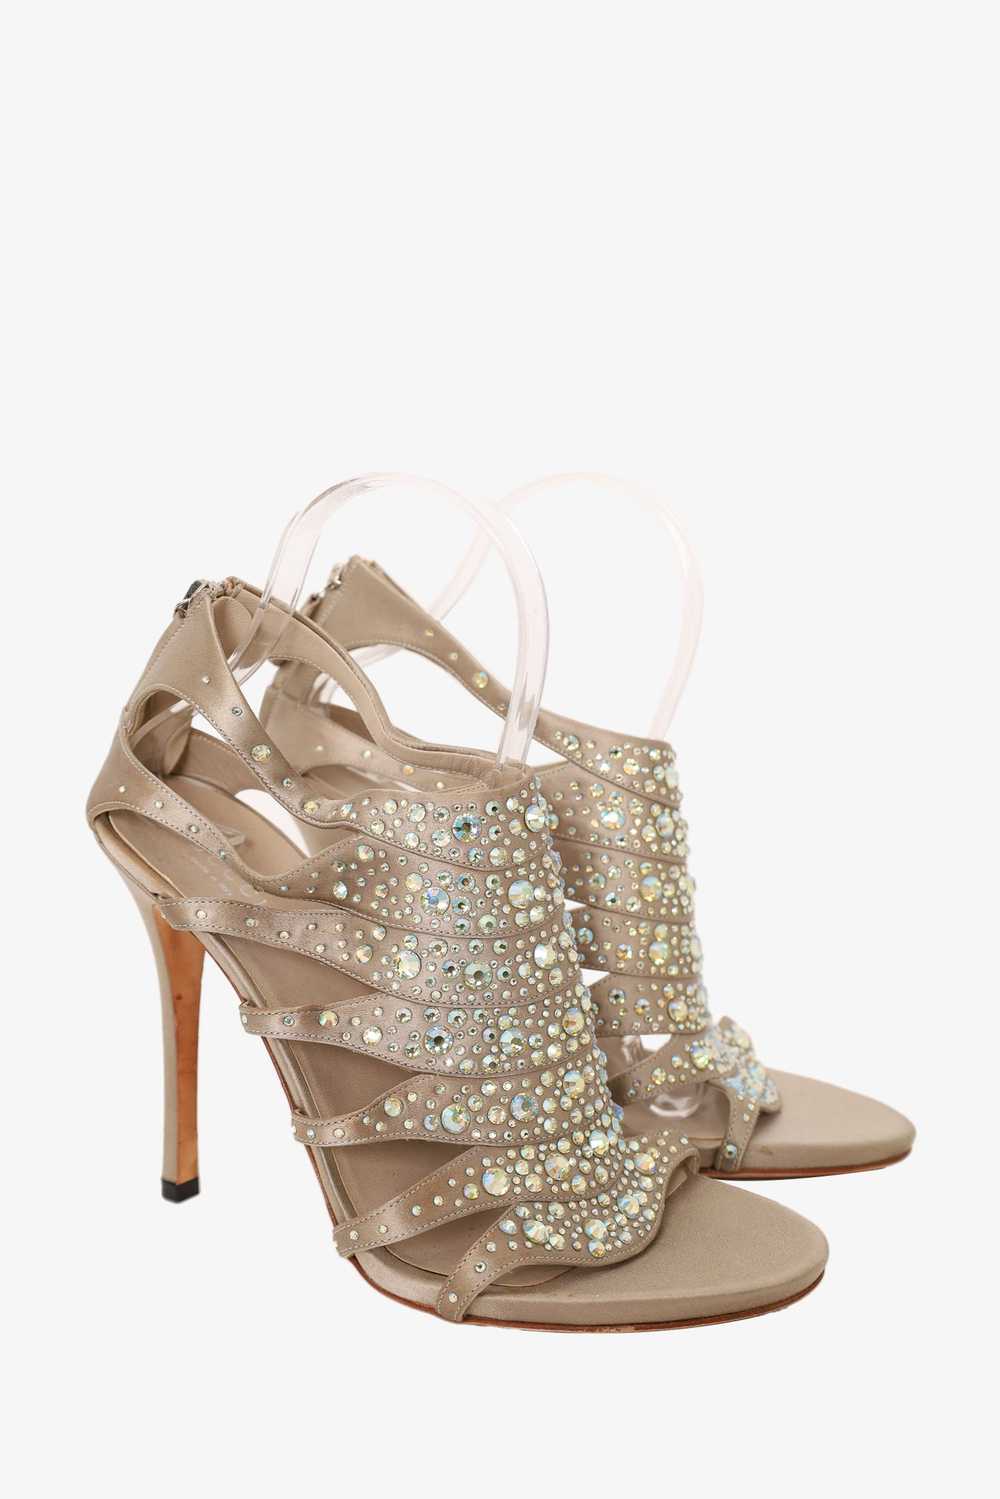 Gucci Gold Satin Crystals Strappy Sandals Size 39… - image 2